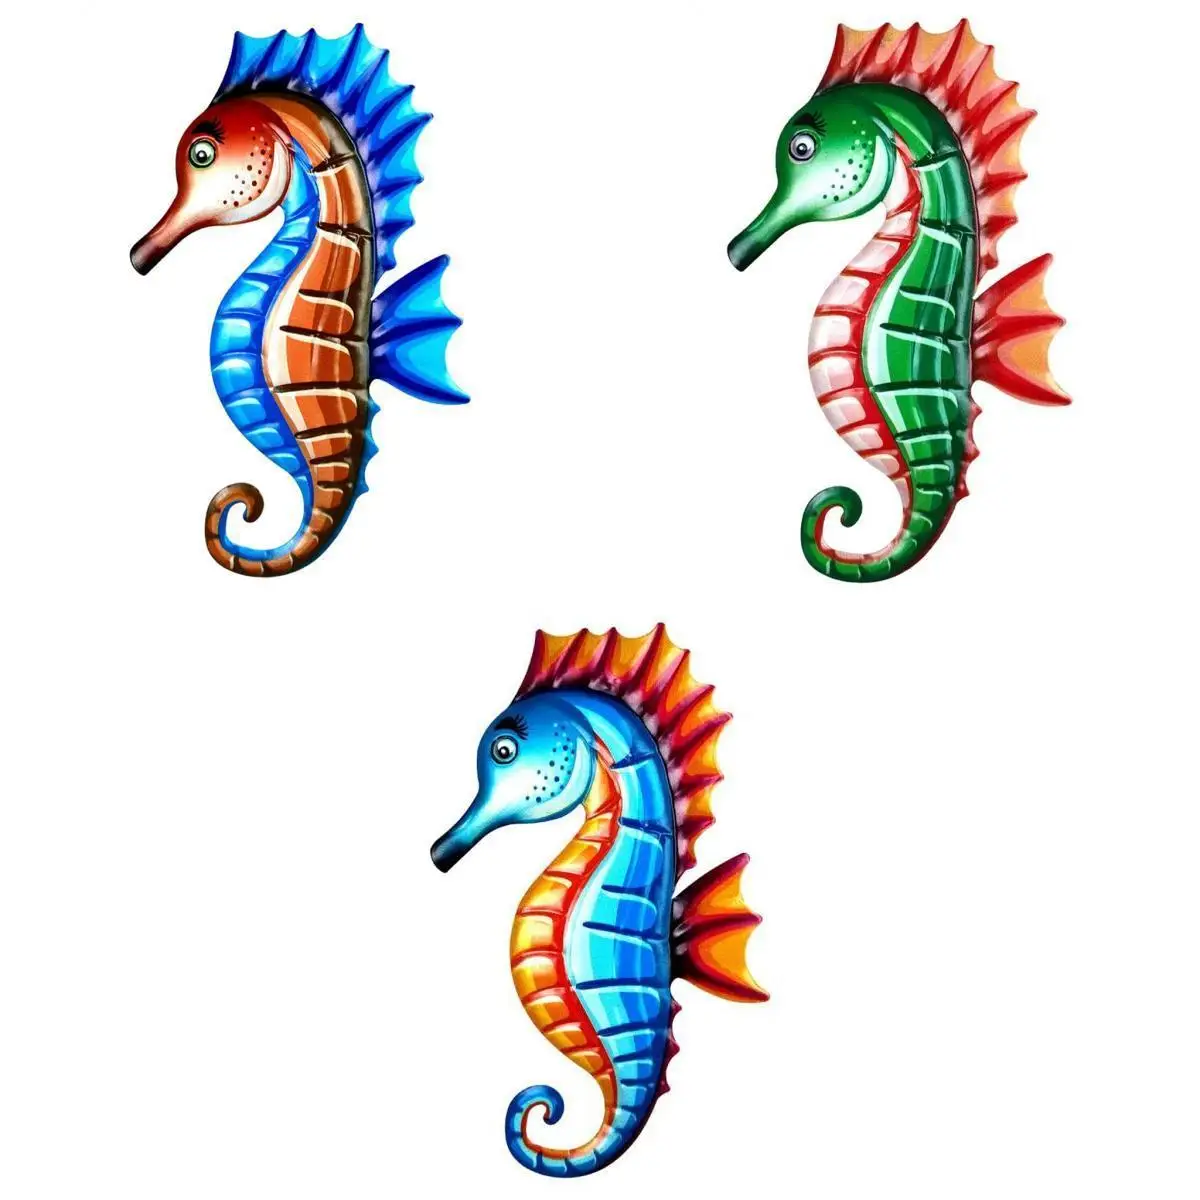 3 Piece Seahorse Wall Decor for Home Living Room Picket Fence Yard